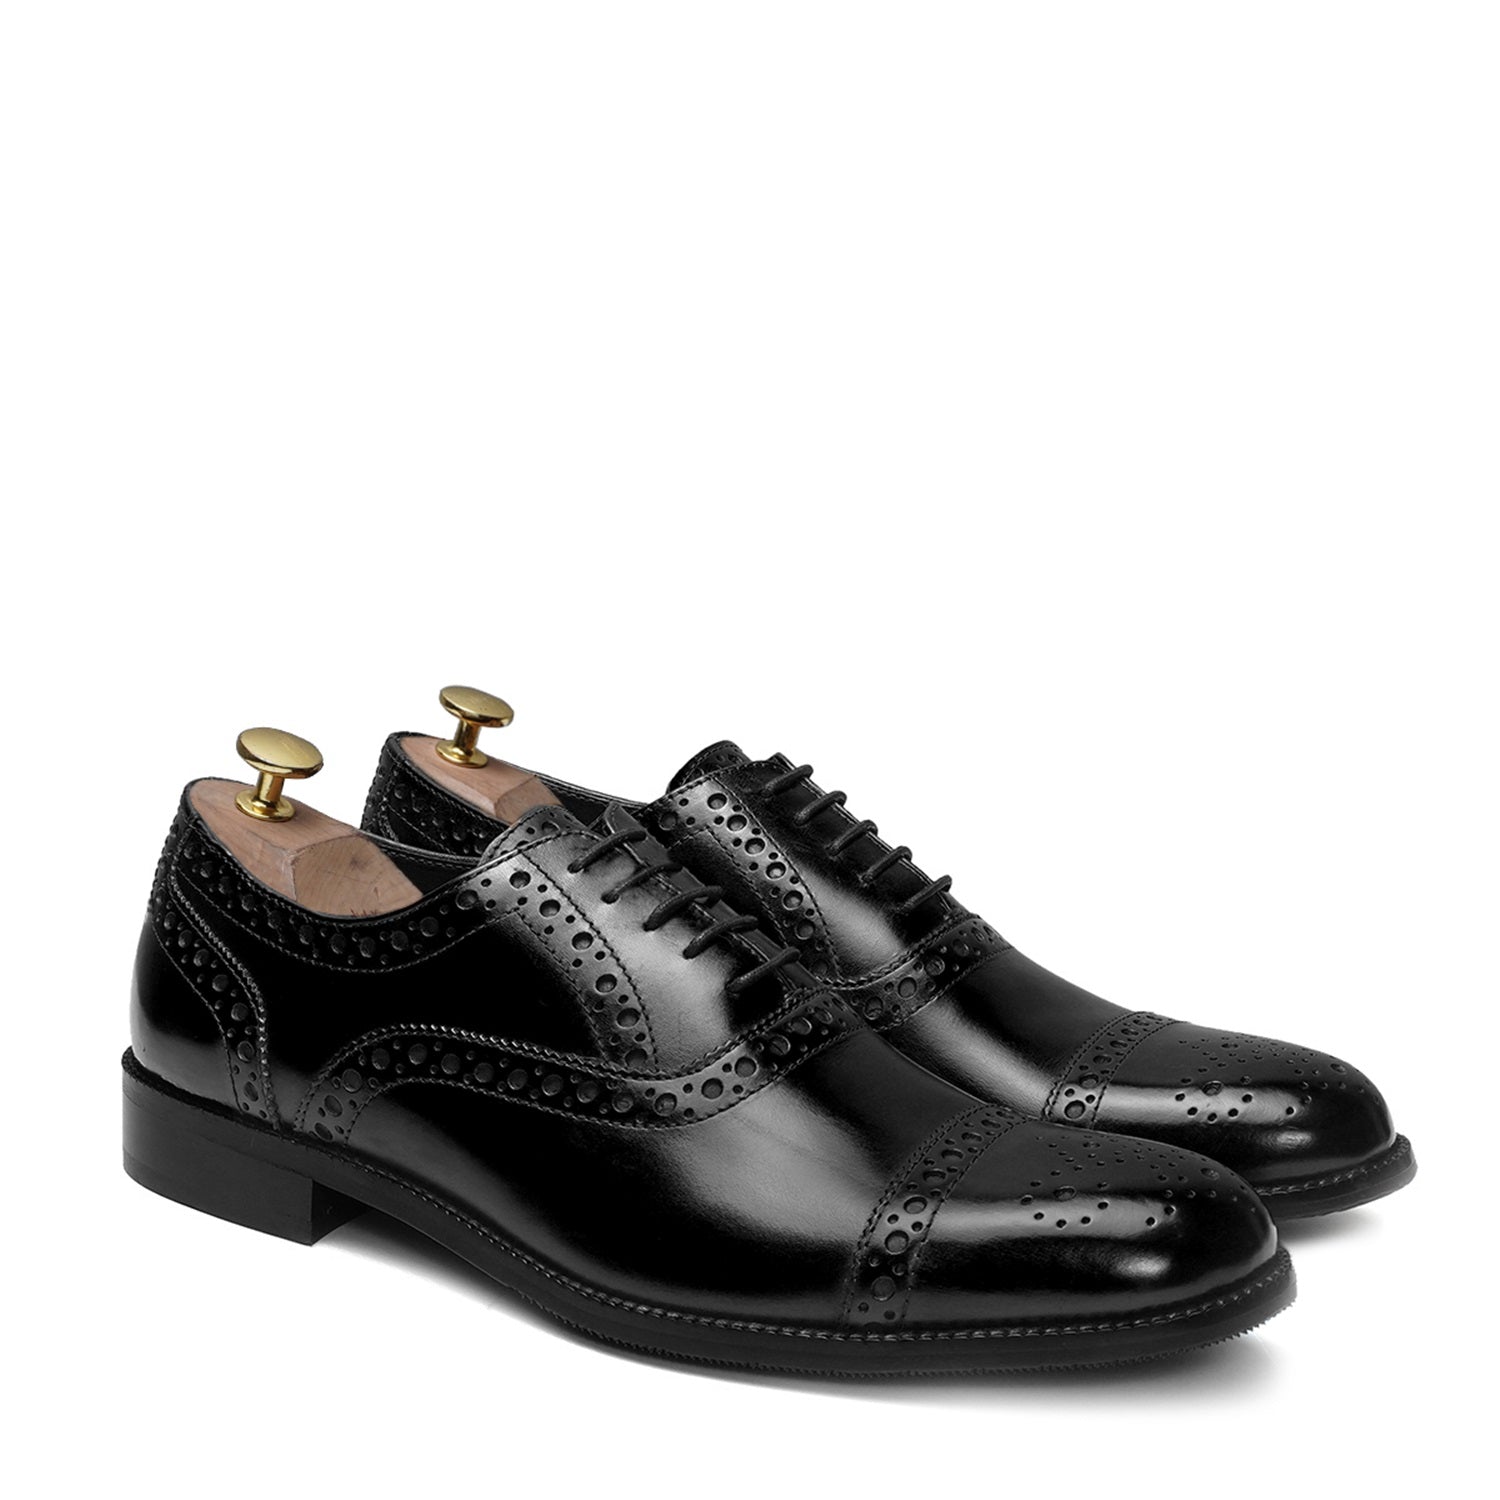 Oxford Lace-Up Shoe with Punching Brogue Design in Black Genuine Leather